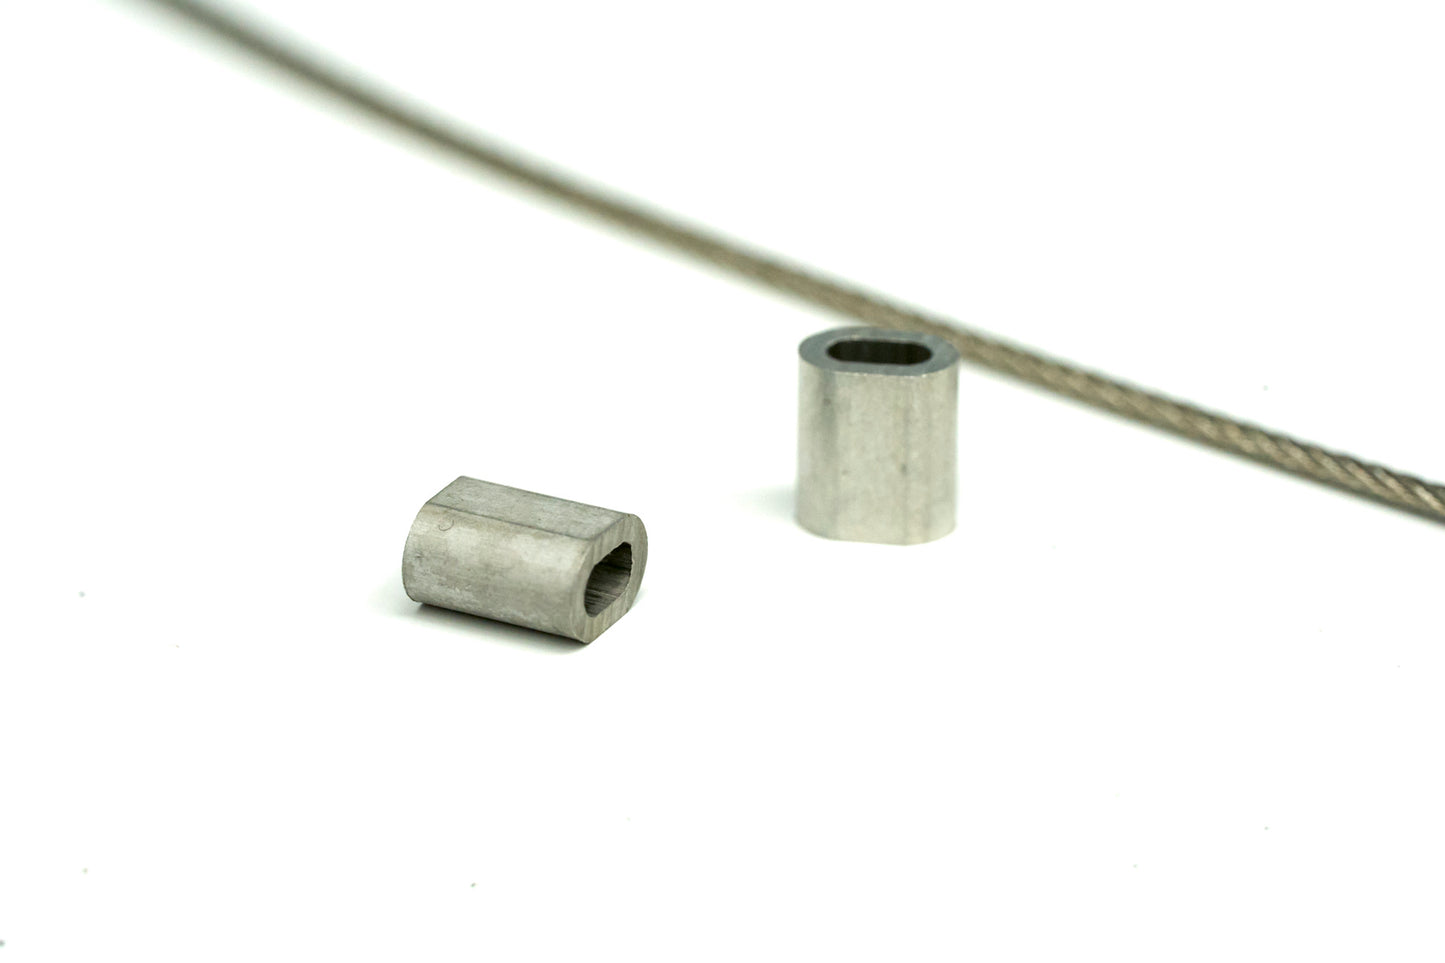 Crimping eyelet for stainless steel cable